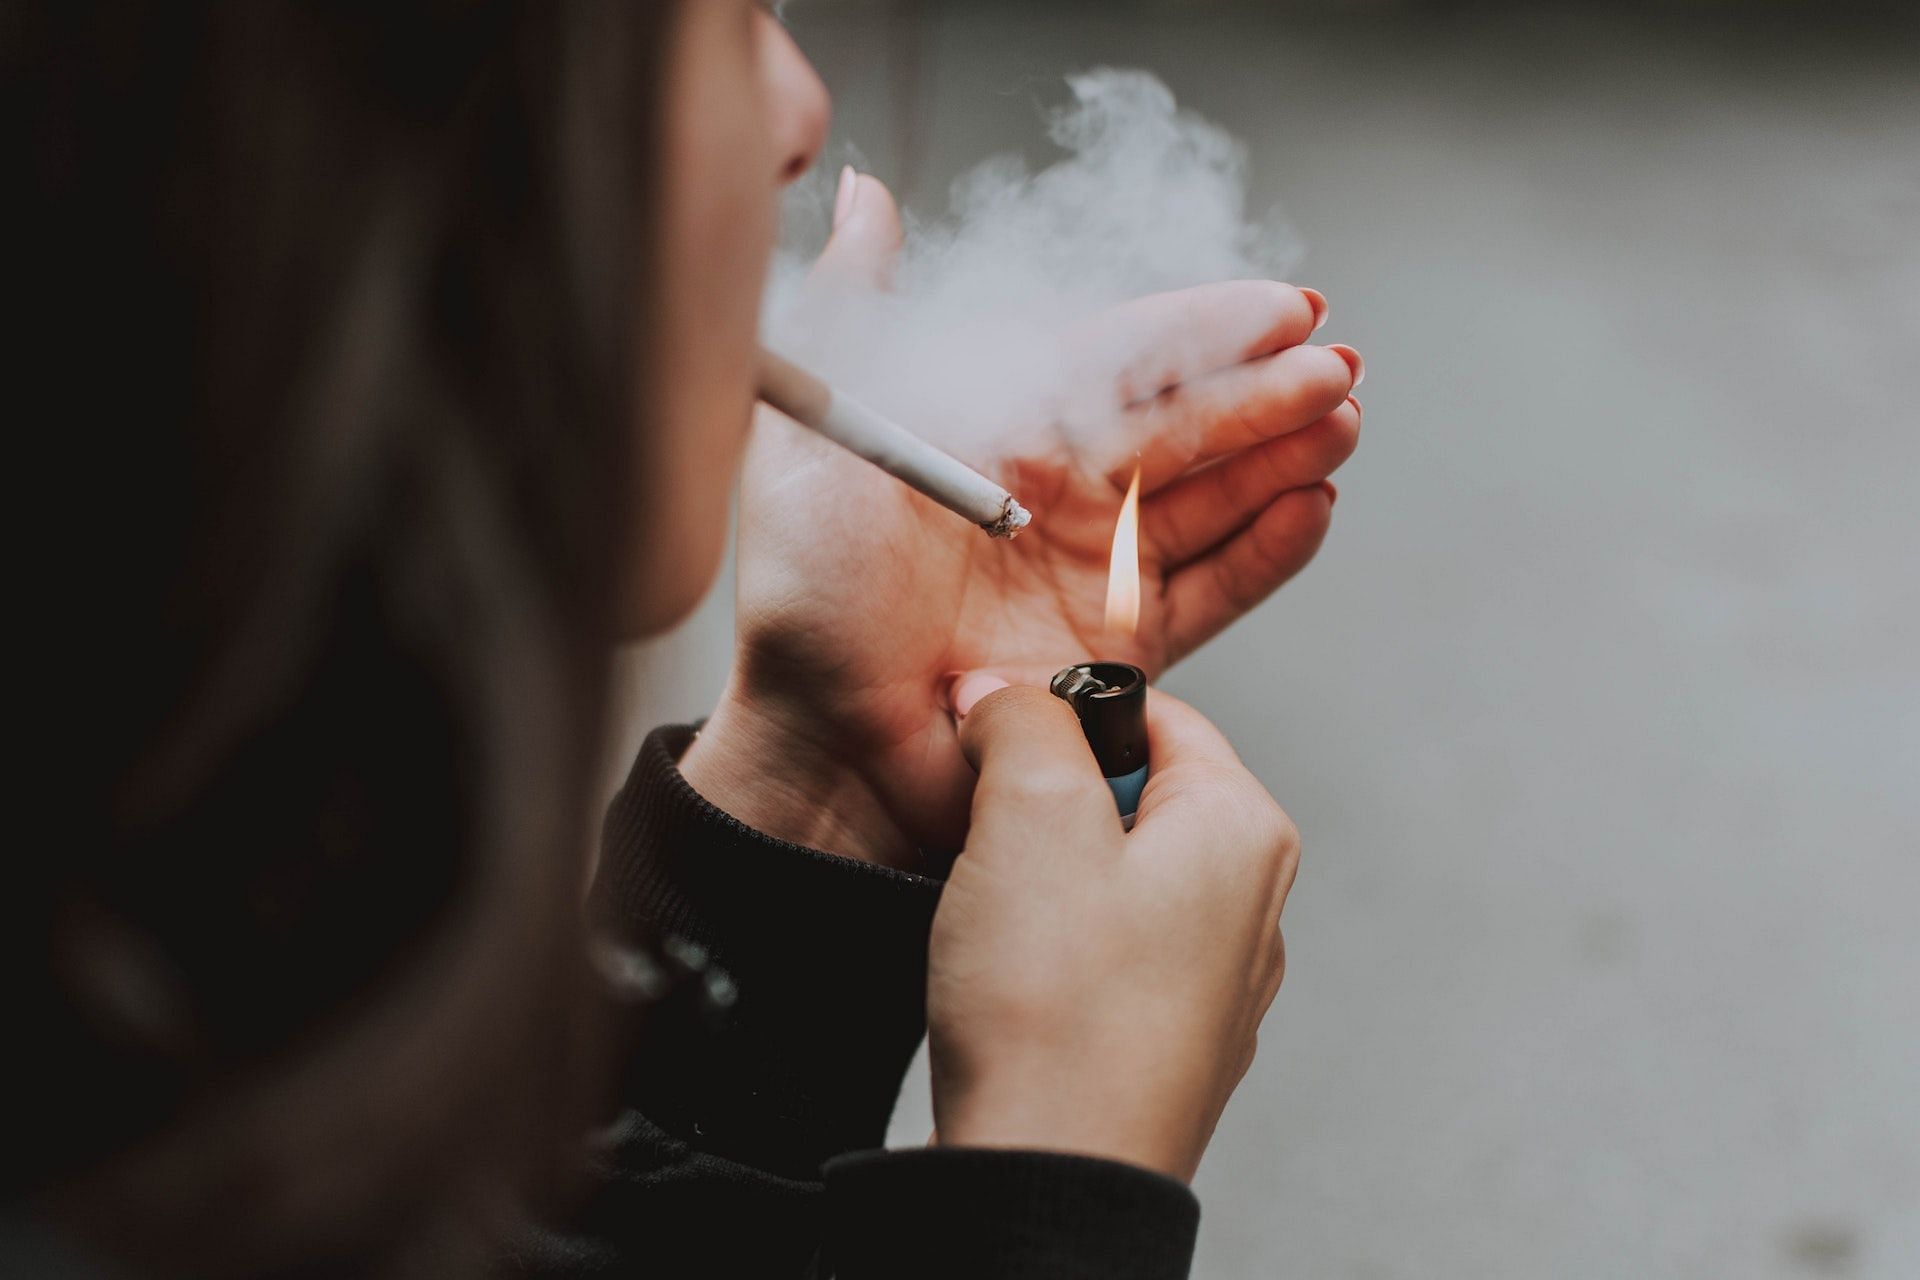 Smoking can cause wrinkles and fine lines. (Photo via Pexels/lil artsy)